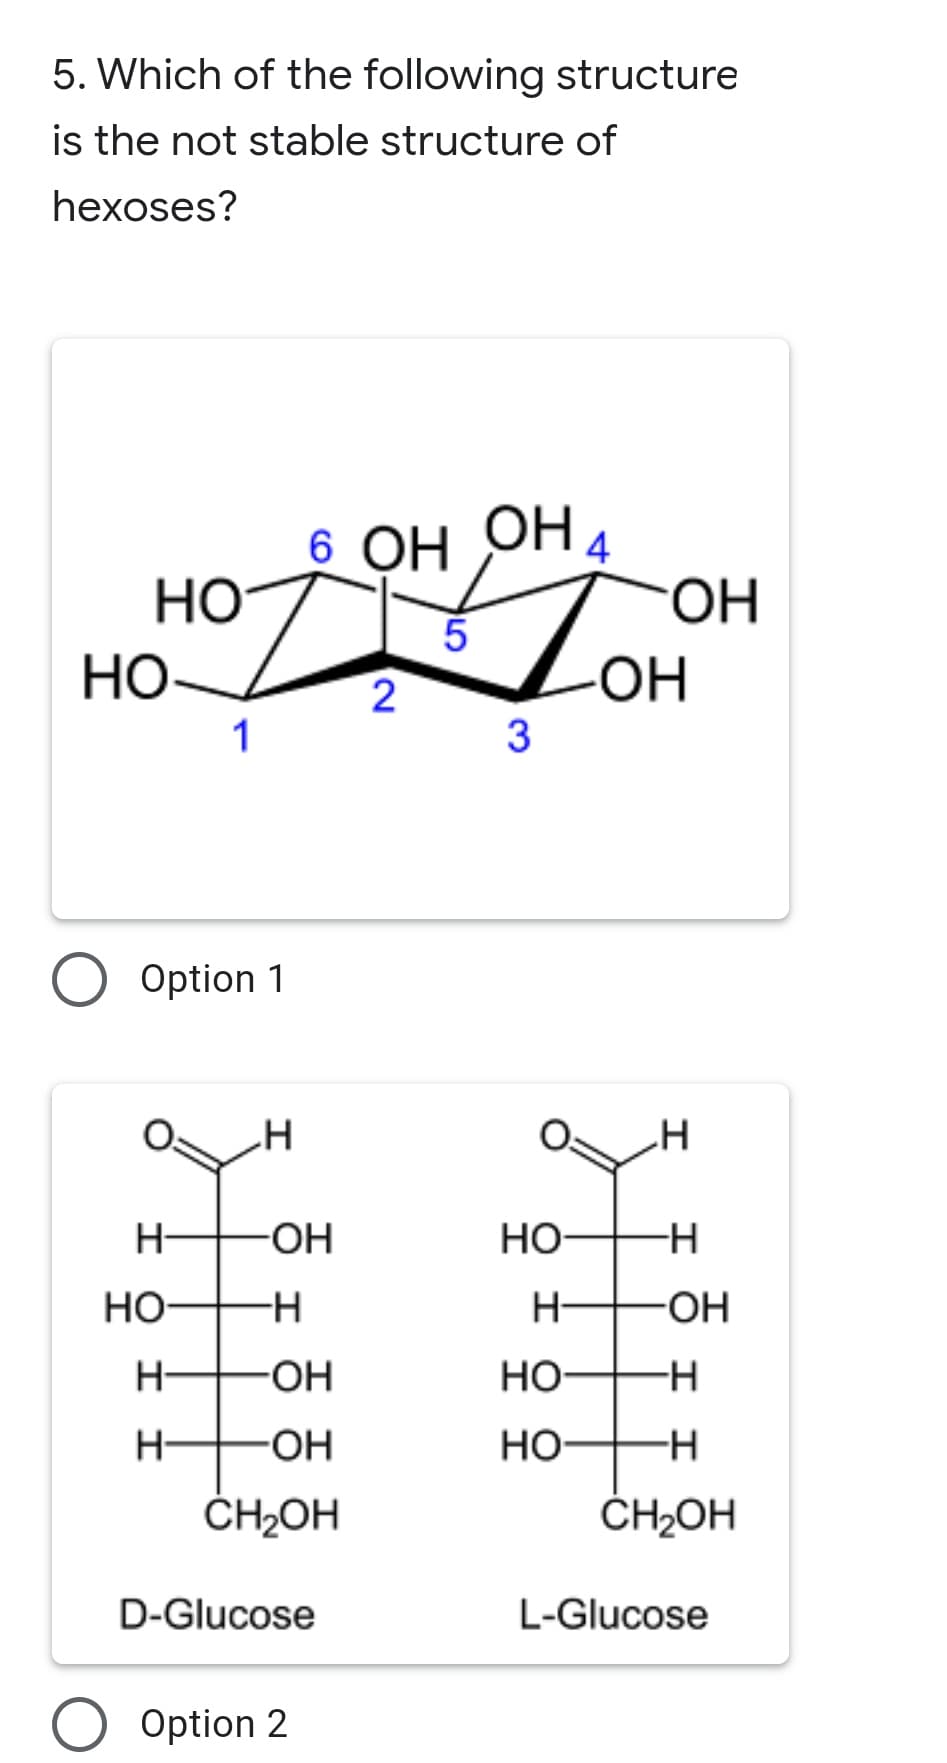 5. Which of the following structure
is the not stable structure of
hexoses?
6 OH OHA
OH.
HO
HO-
2
-HO-
1
3
O Option 1
H-
HO-
Но-
Но
H-
HO-
-HO-
но-
H-
-HO-
Но
ČH2OH
ČH2OH
D-Glucose
L-Glucose
Option 2
